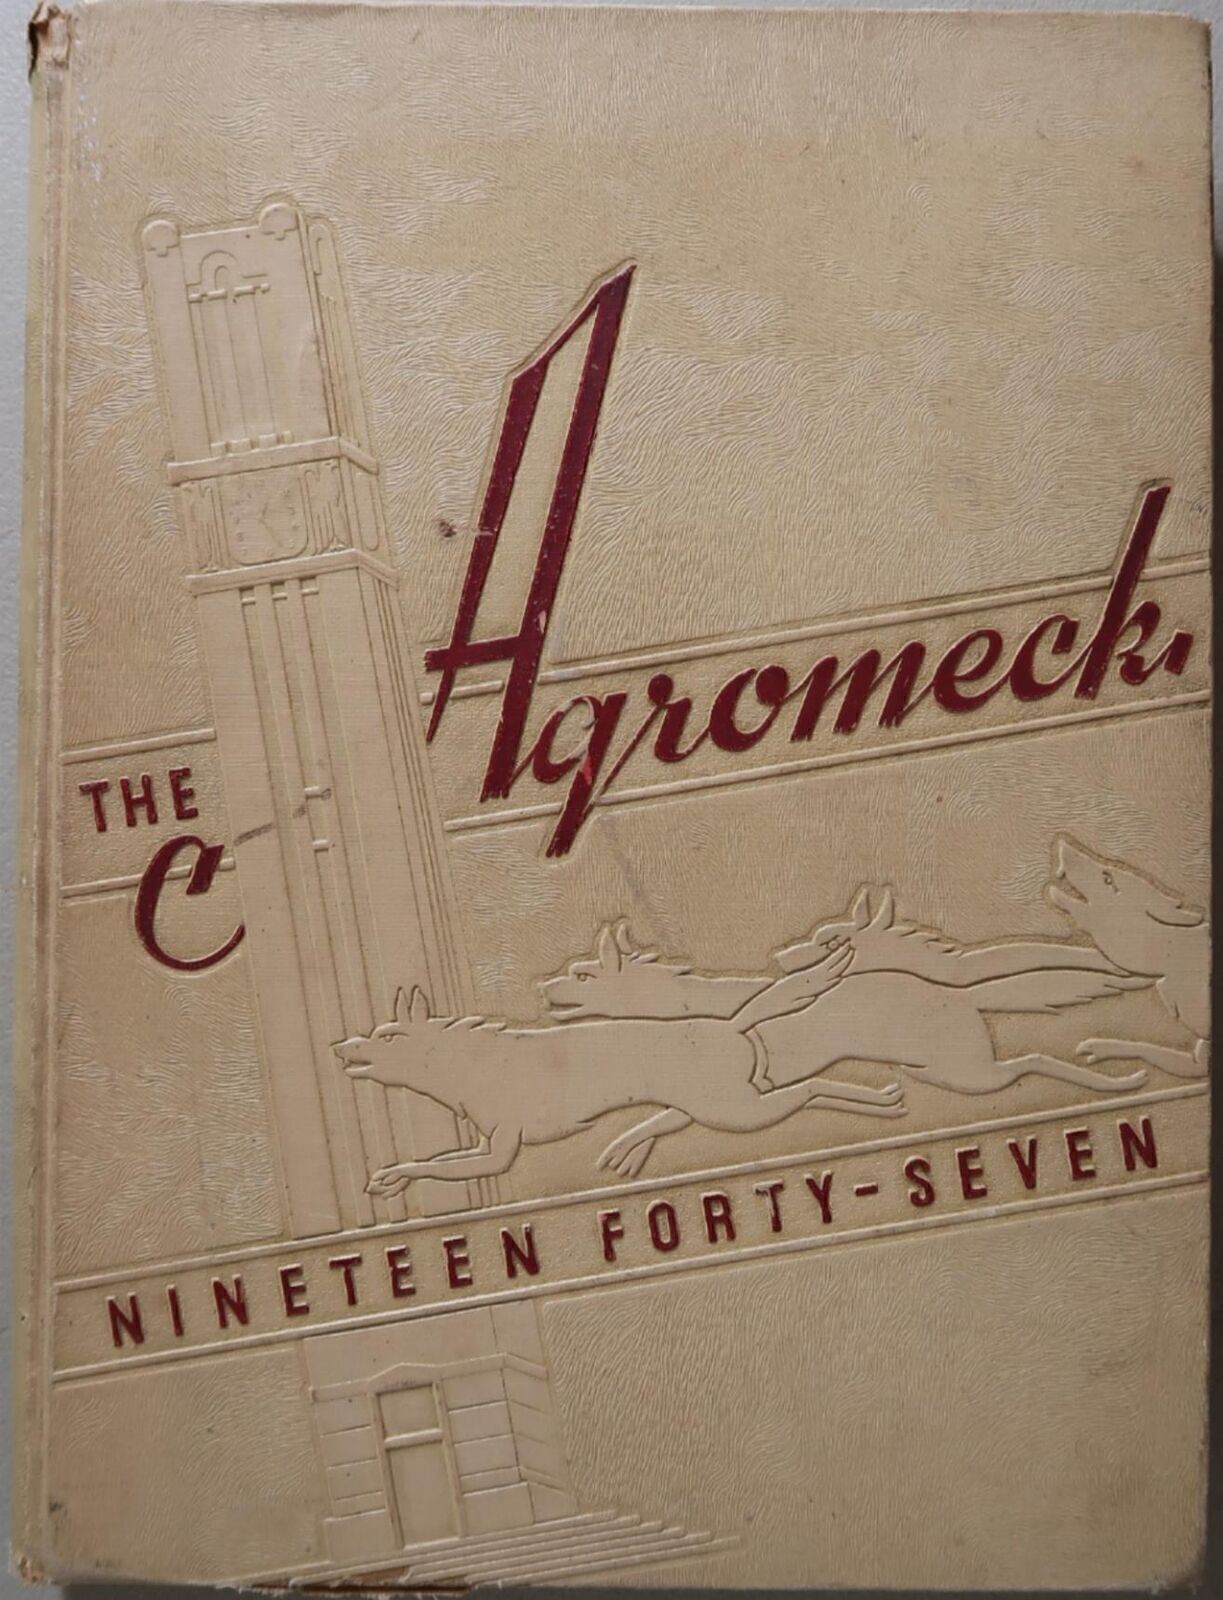 1947 NORTH CAROLINA STATE COLLEGE THE AGROMECK YEARBOOK 366 PAGES D1-1